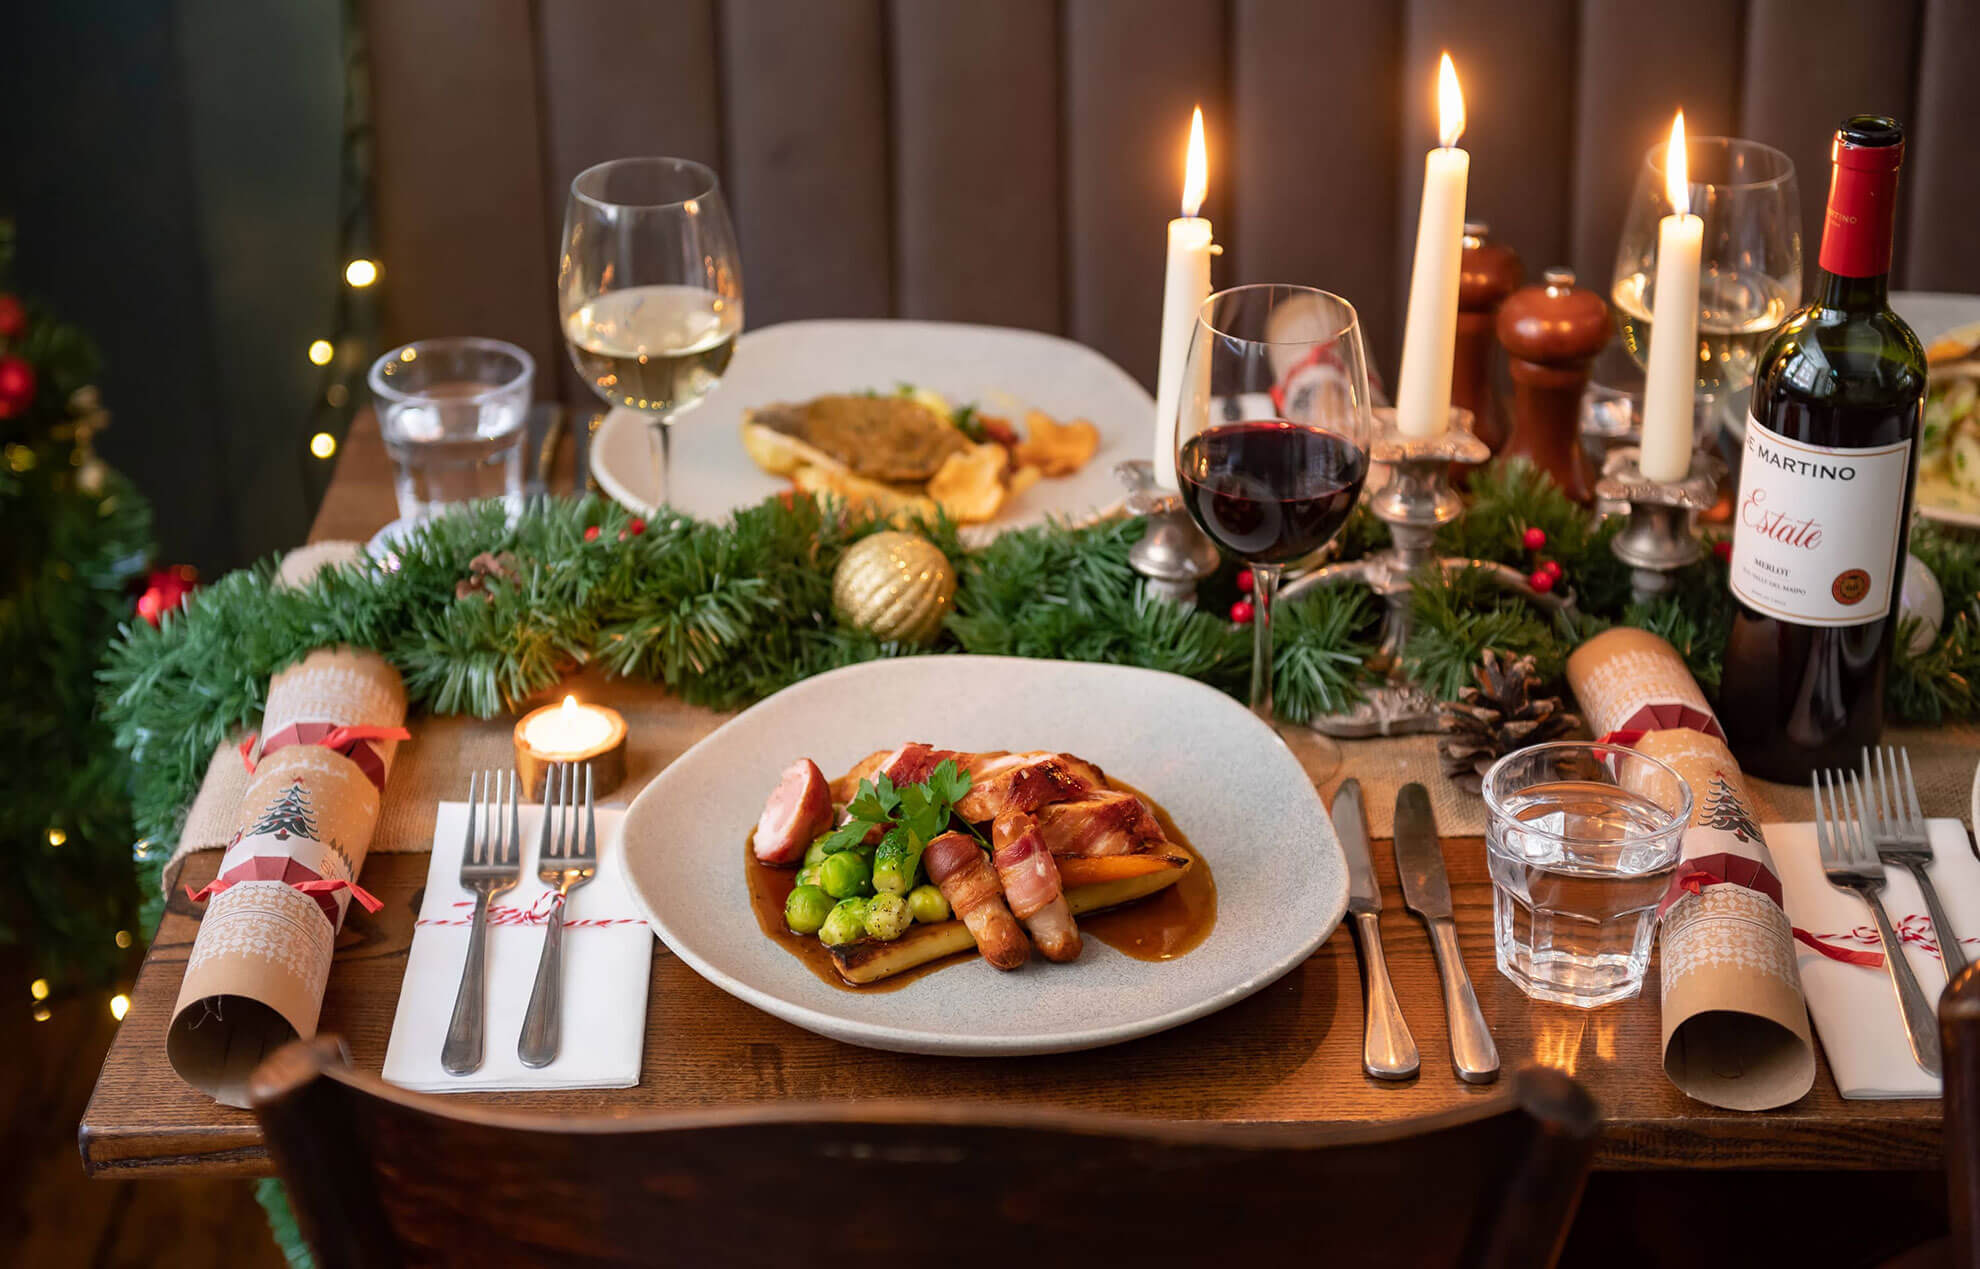 Wooden dining table filled with Christmas-themed food and rustic decor